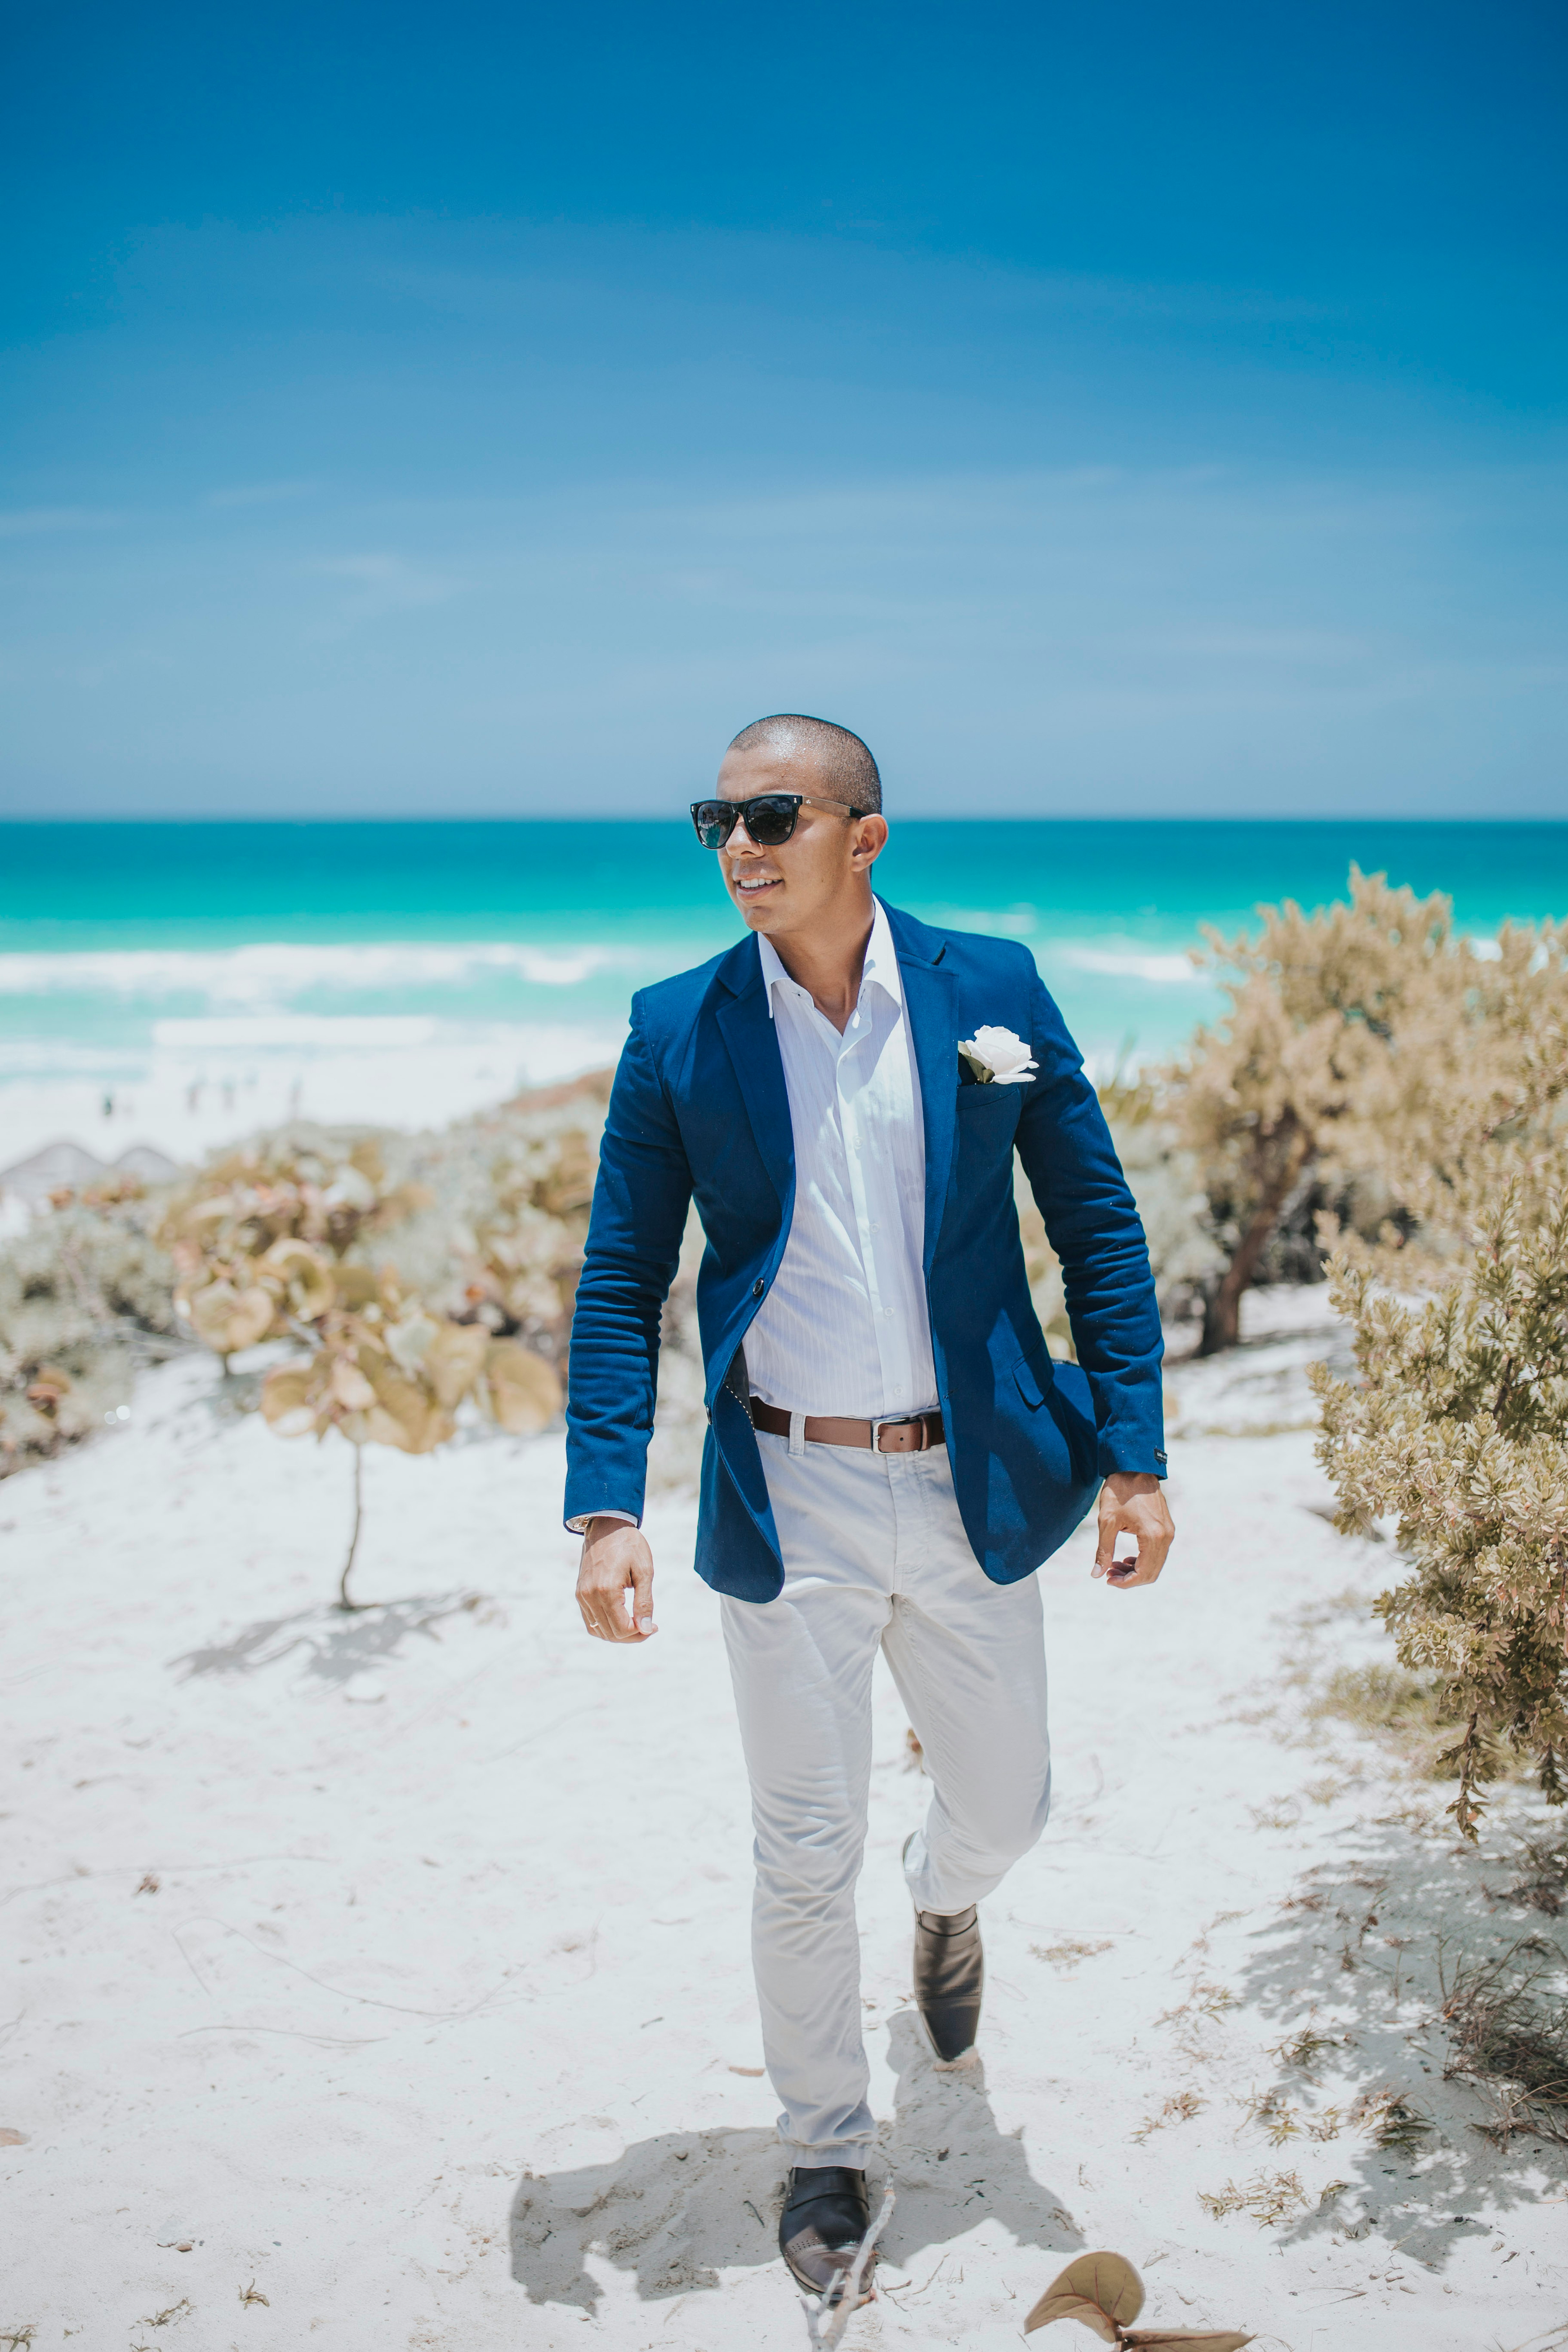 man in blue suit standing on white sand near body of water during daytime